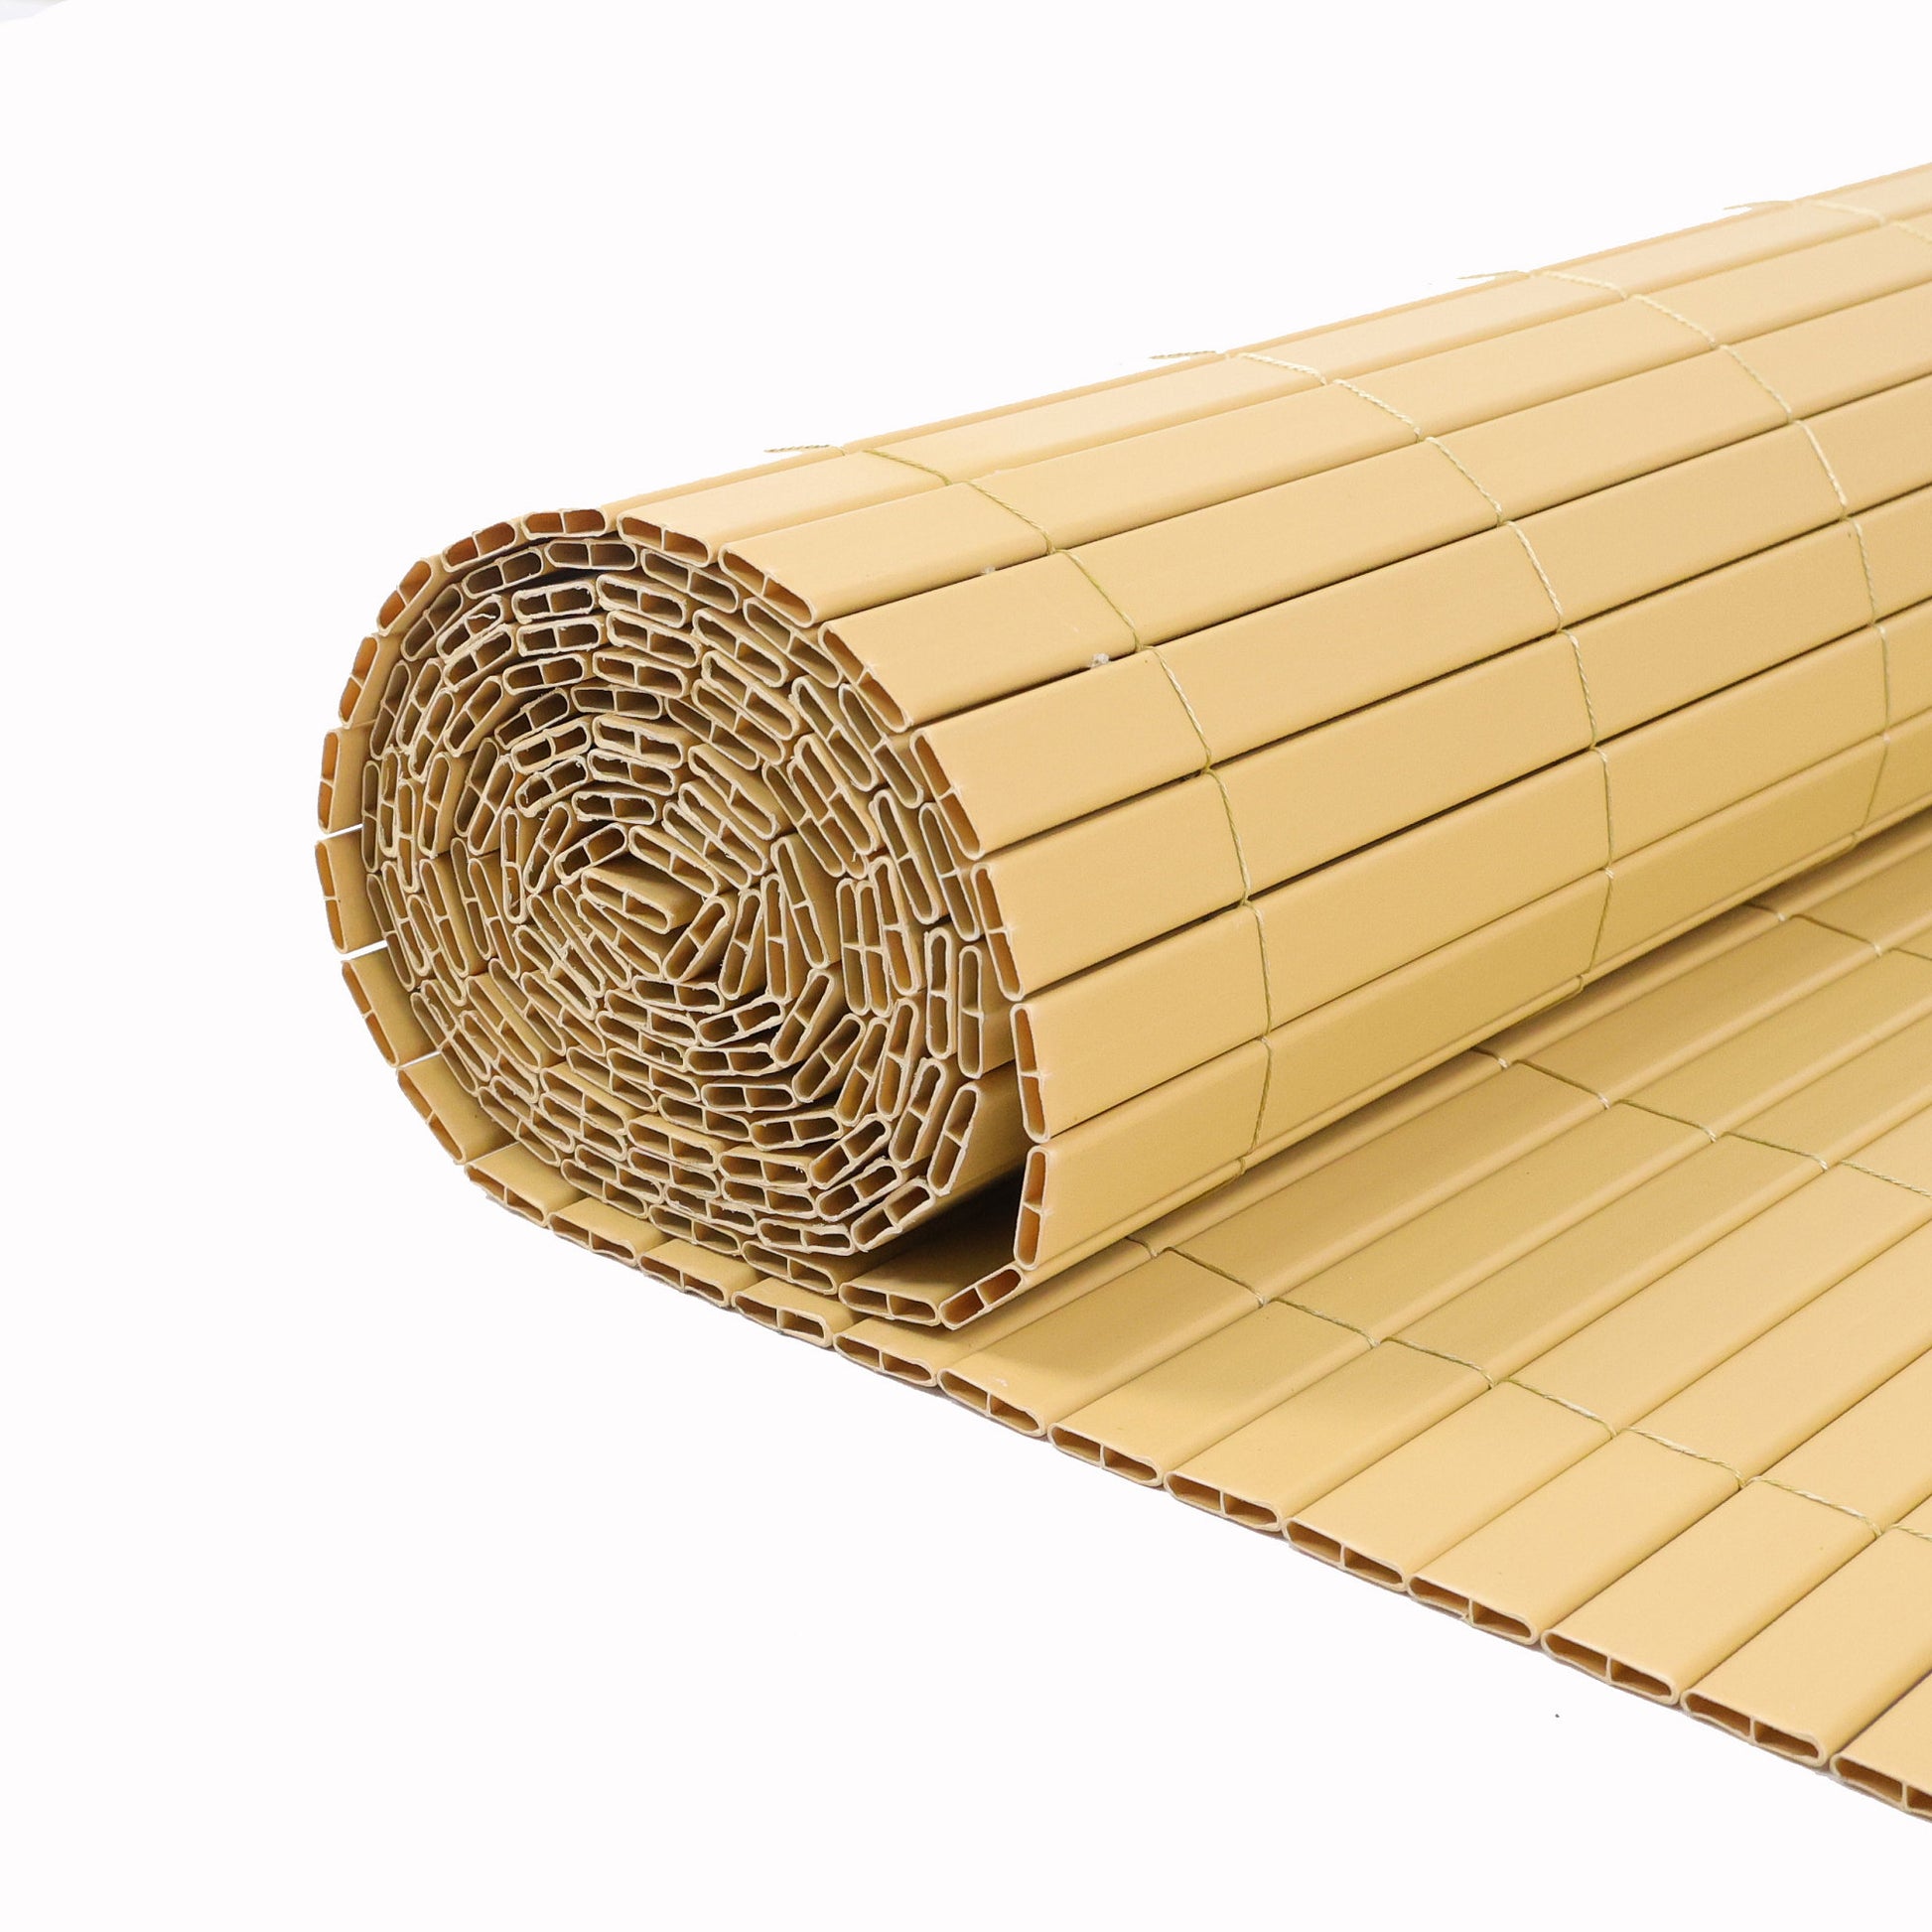 Artificial PVC Bamboo Screening Fence 4m - Natural